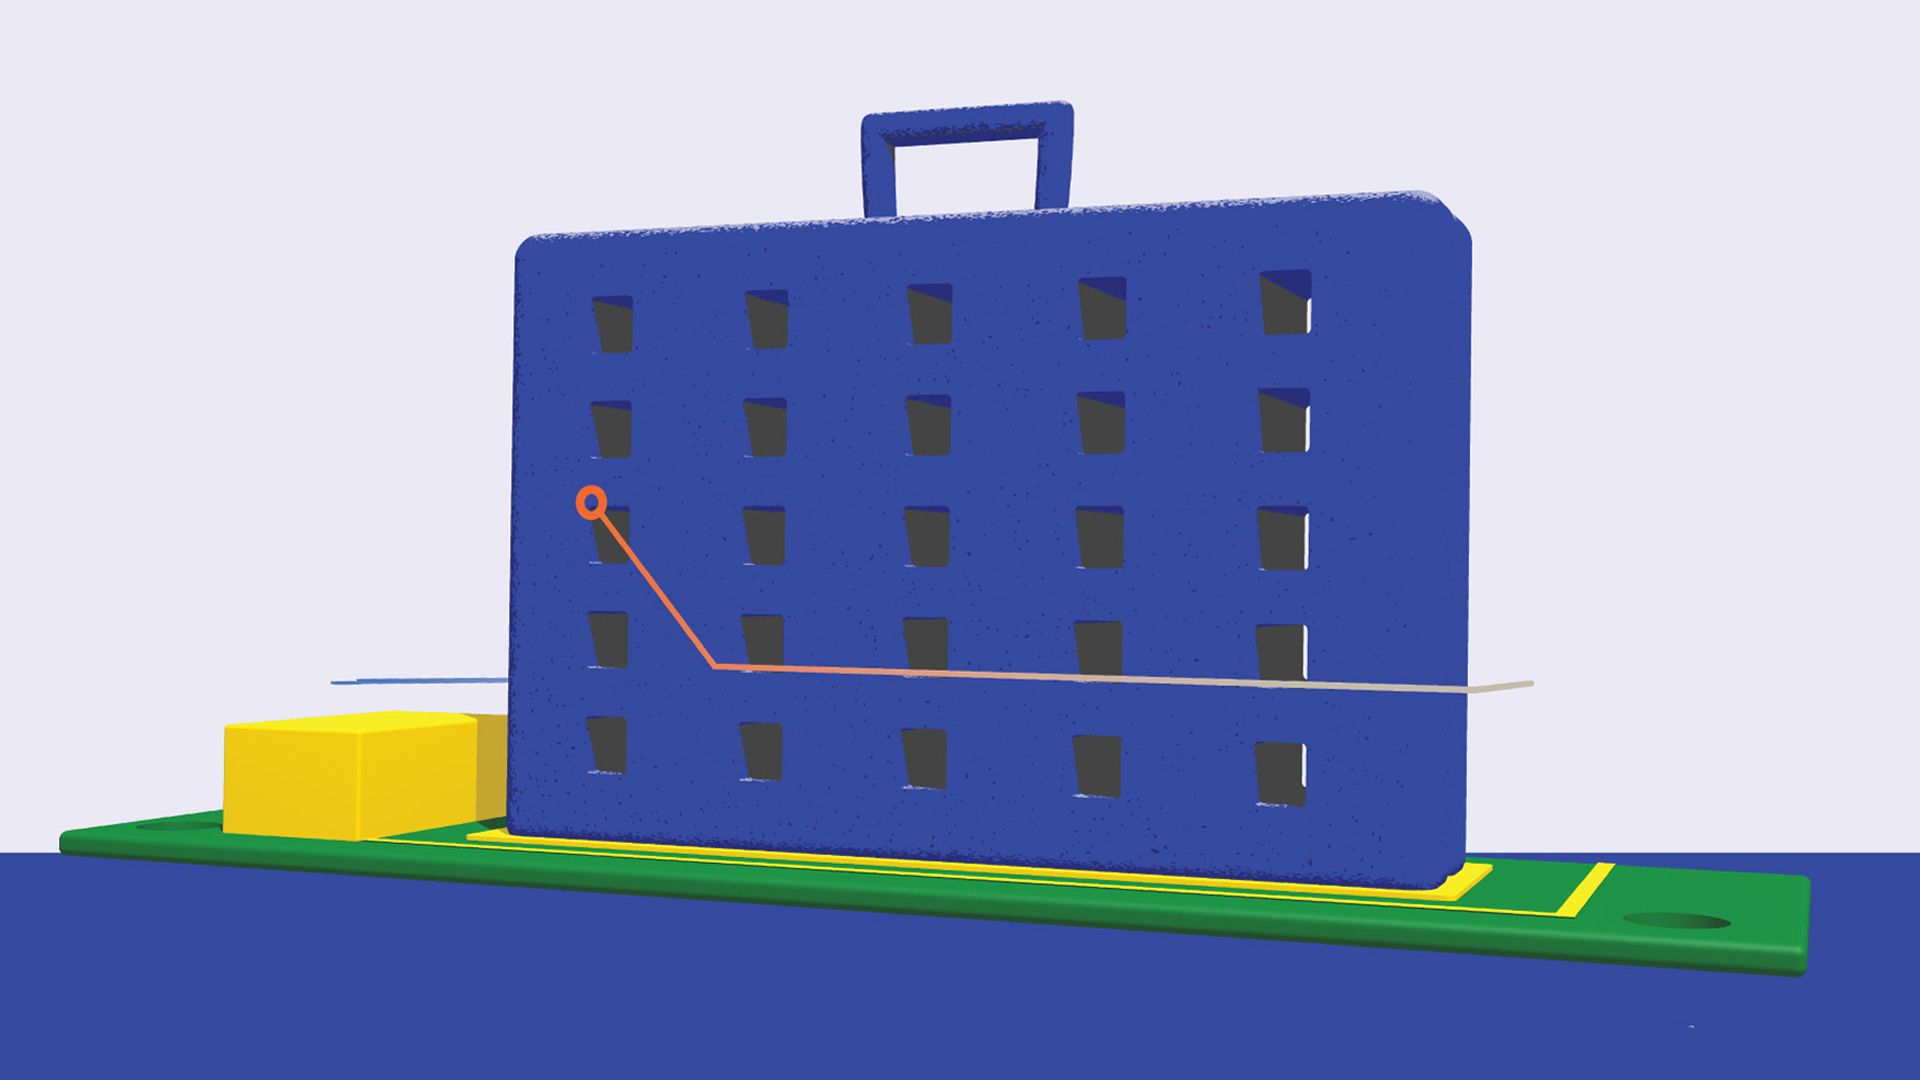 Illustration of an office building shaped like a briefcase